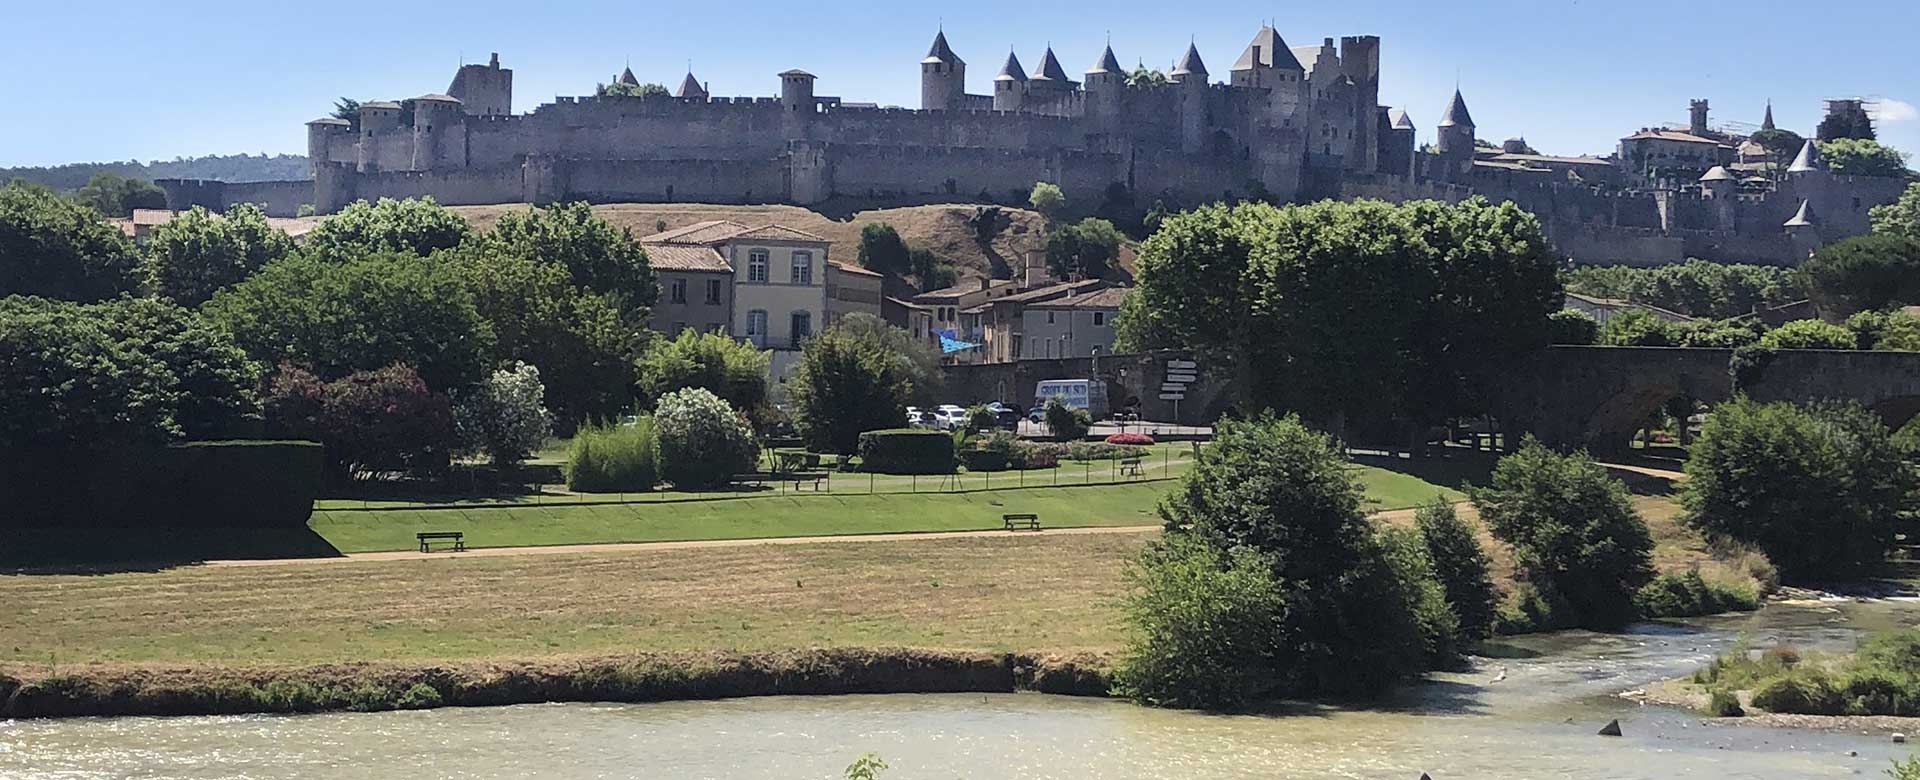 The Montolieu campsite is close to the city of Carcassonne.